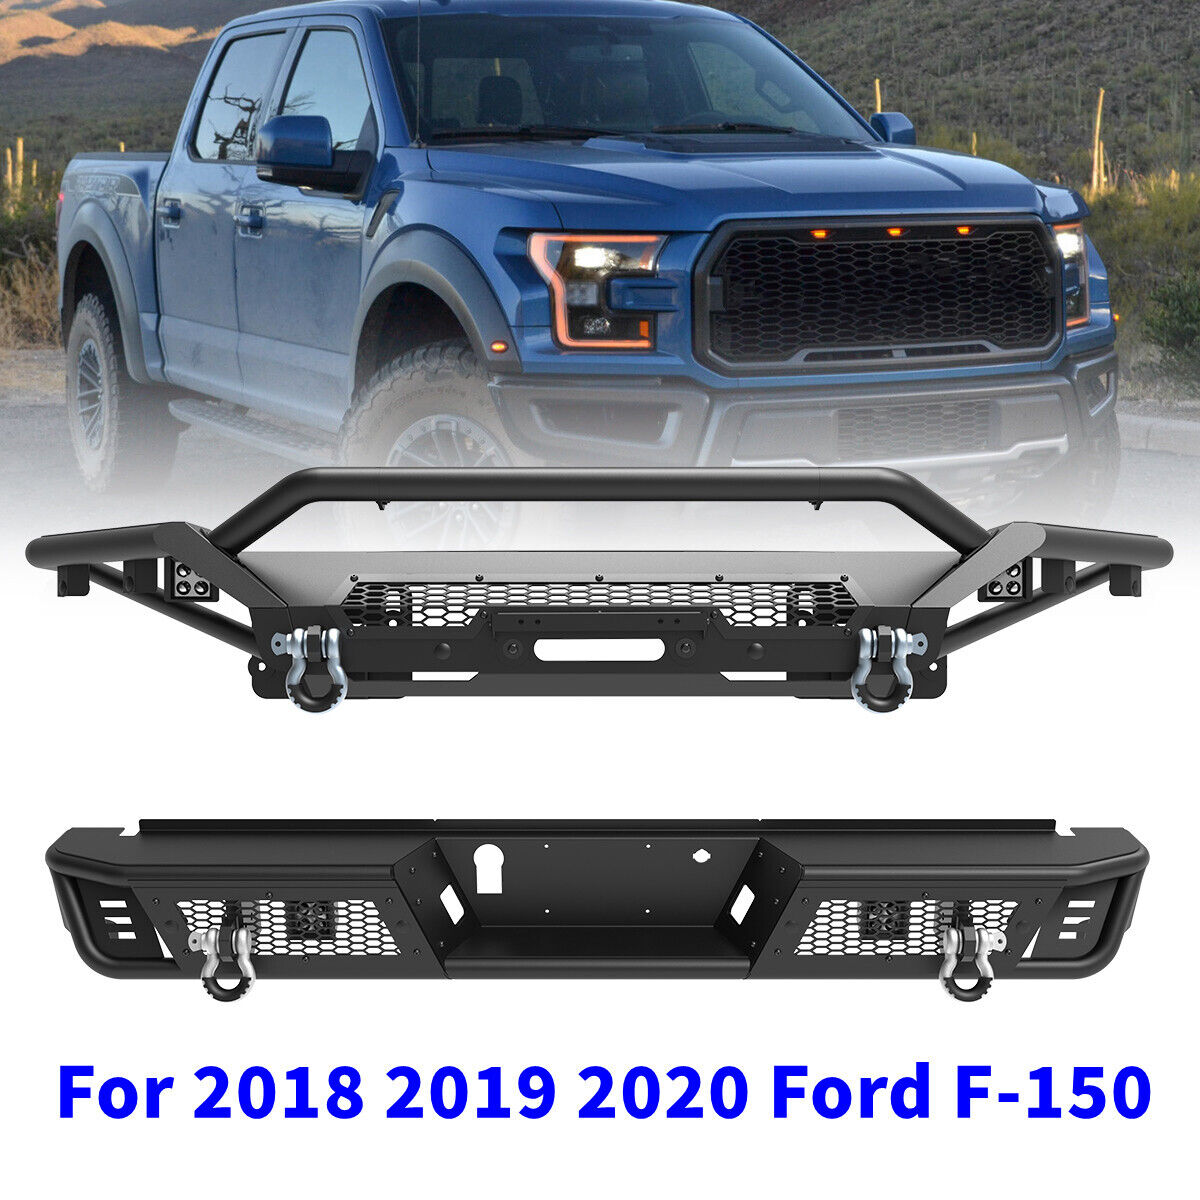 3 IN 1 Steel Front Bumper Assembly + Rear Bumper For 2018 2019 2020 Ford F-150